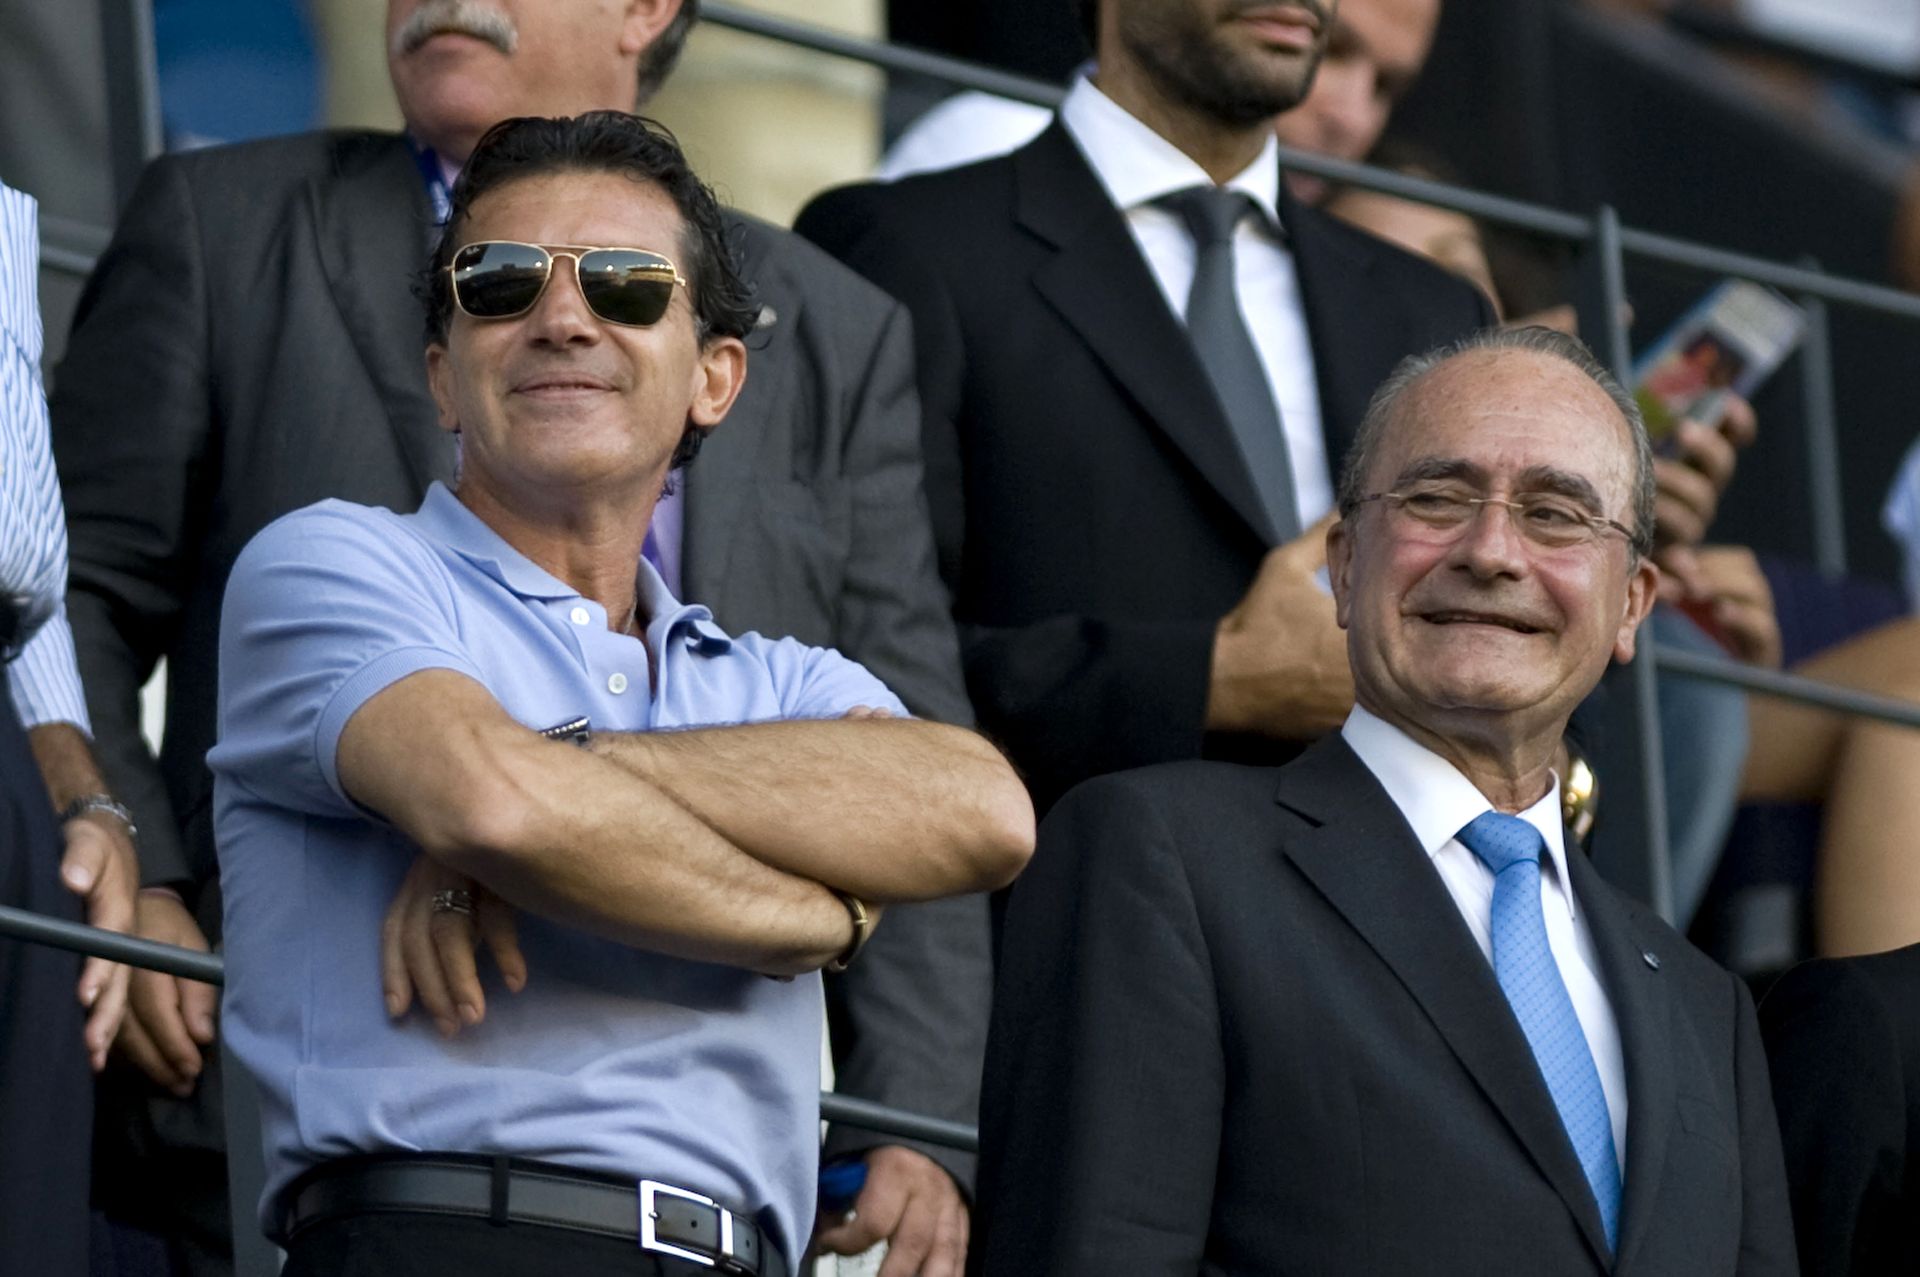 <p>                     Antonio Banderas is one of Malaga's most famous sons and the Hollywood actor is a big fan of the city's football club, Malaga CF.                   </p>                                      <p>                     Banderas often takes to social media to post his thoughts on Malaga games and images from La Rosaleda. In 2020, he lent his voice to an emotional video made by the club and more recently he has praised the fans for their passionate support.                   </p>